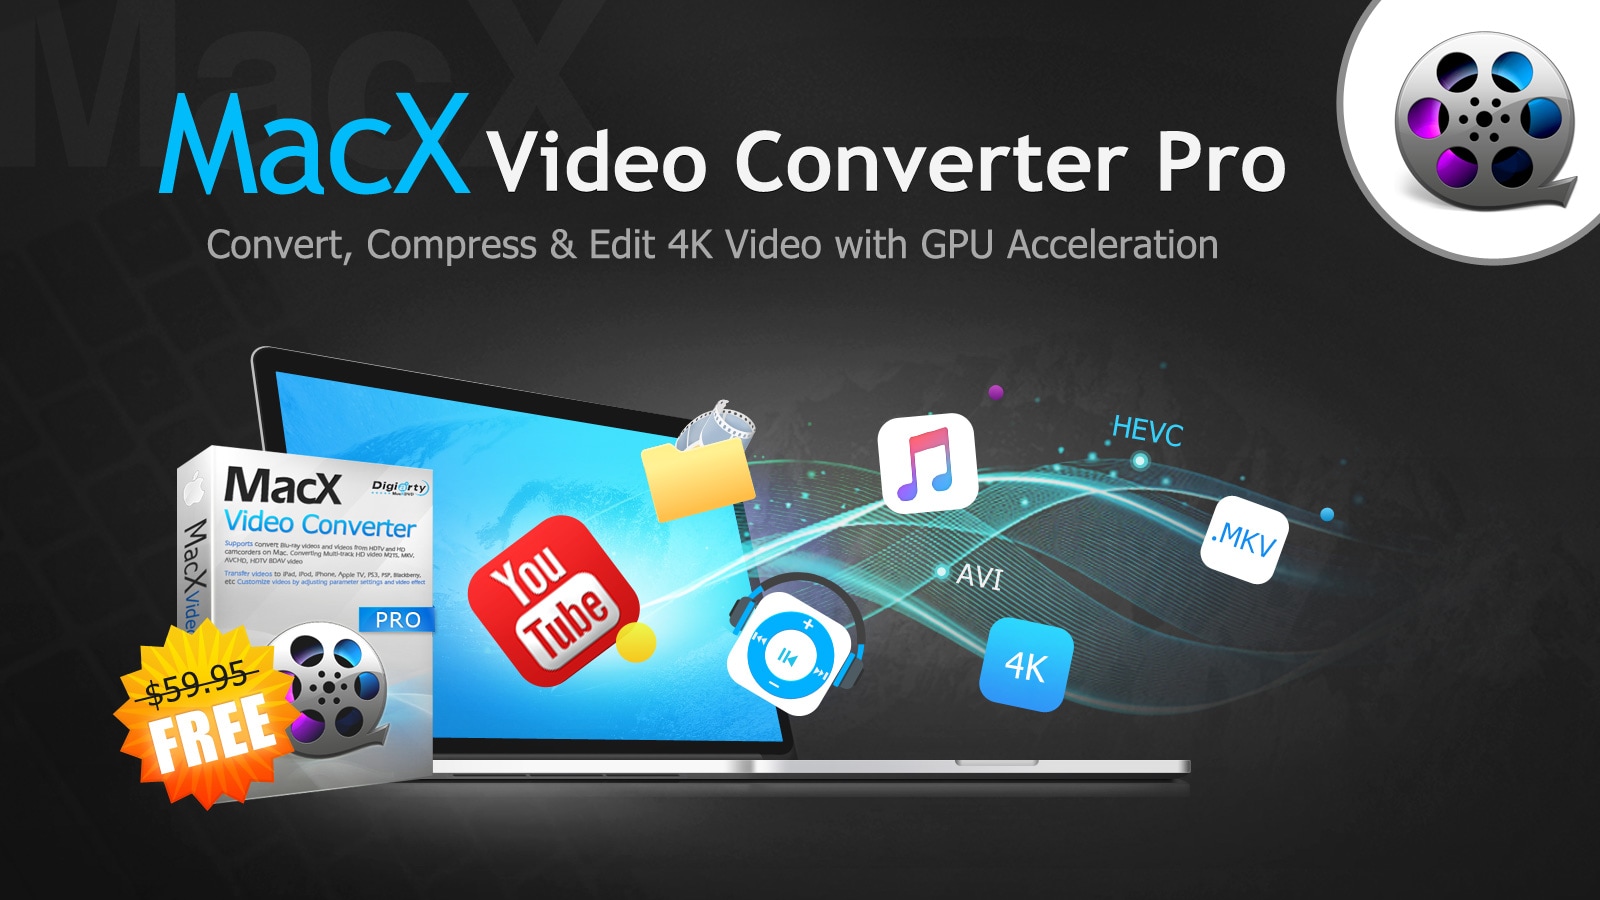 ★ MacX Video Converter Pro converts 4K videos to almost any size and format; Knew how to earn a license!